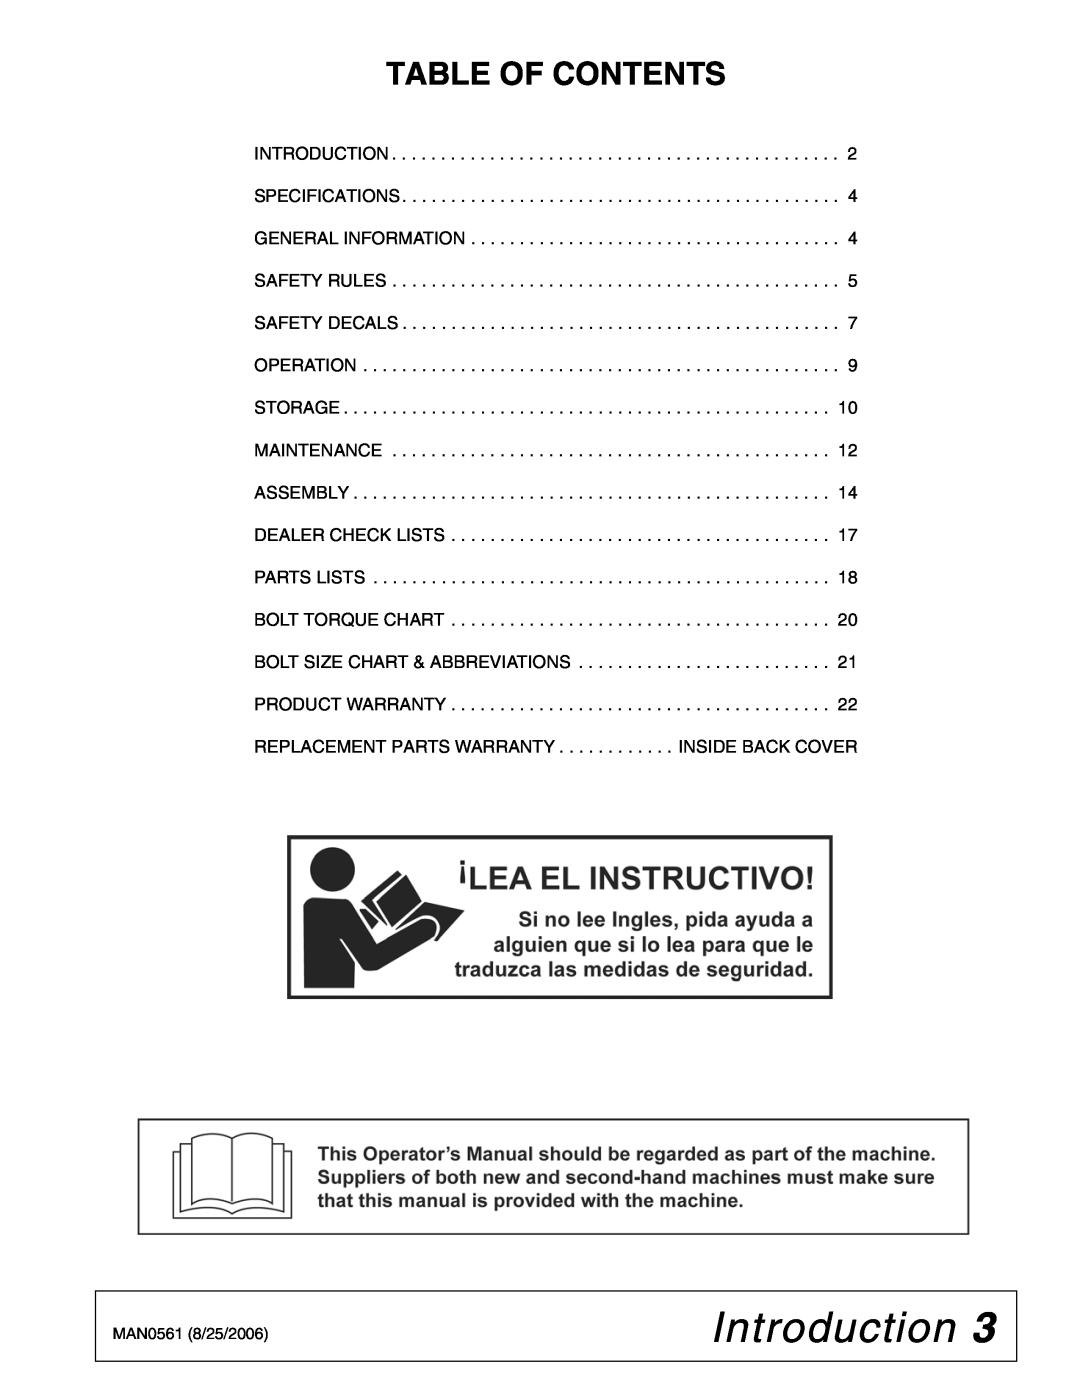 Woods Equipment RBE5, RBE4, BSE5 manual Introduction, Table Of Contents 